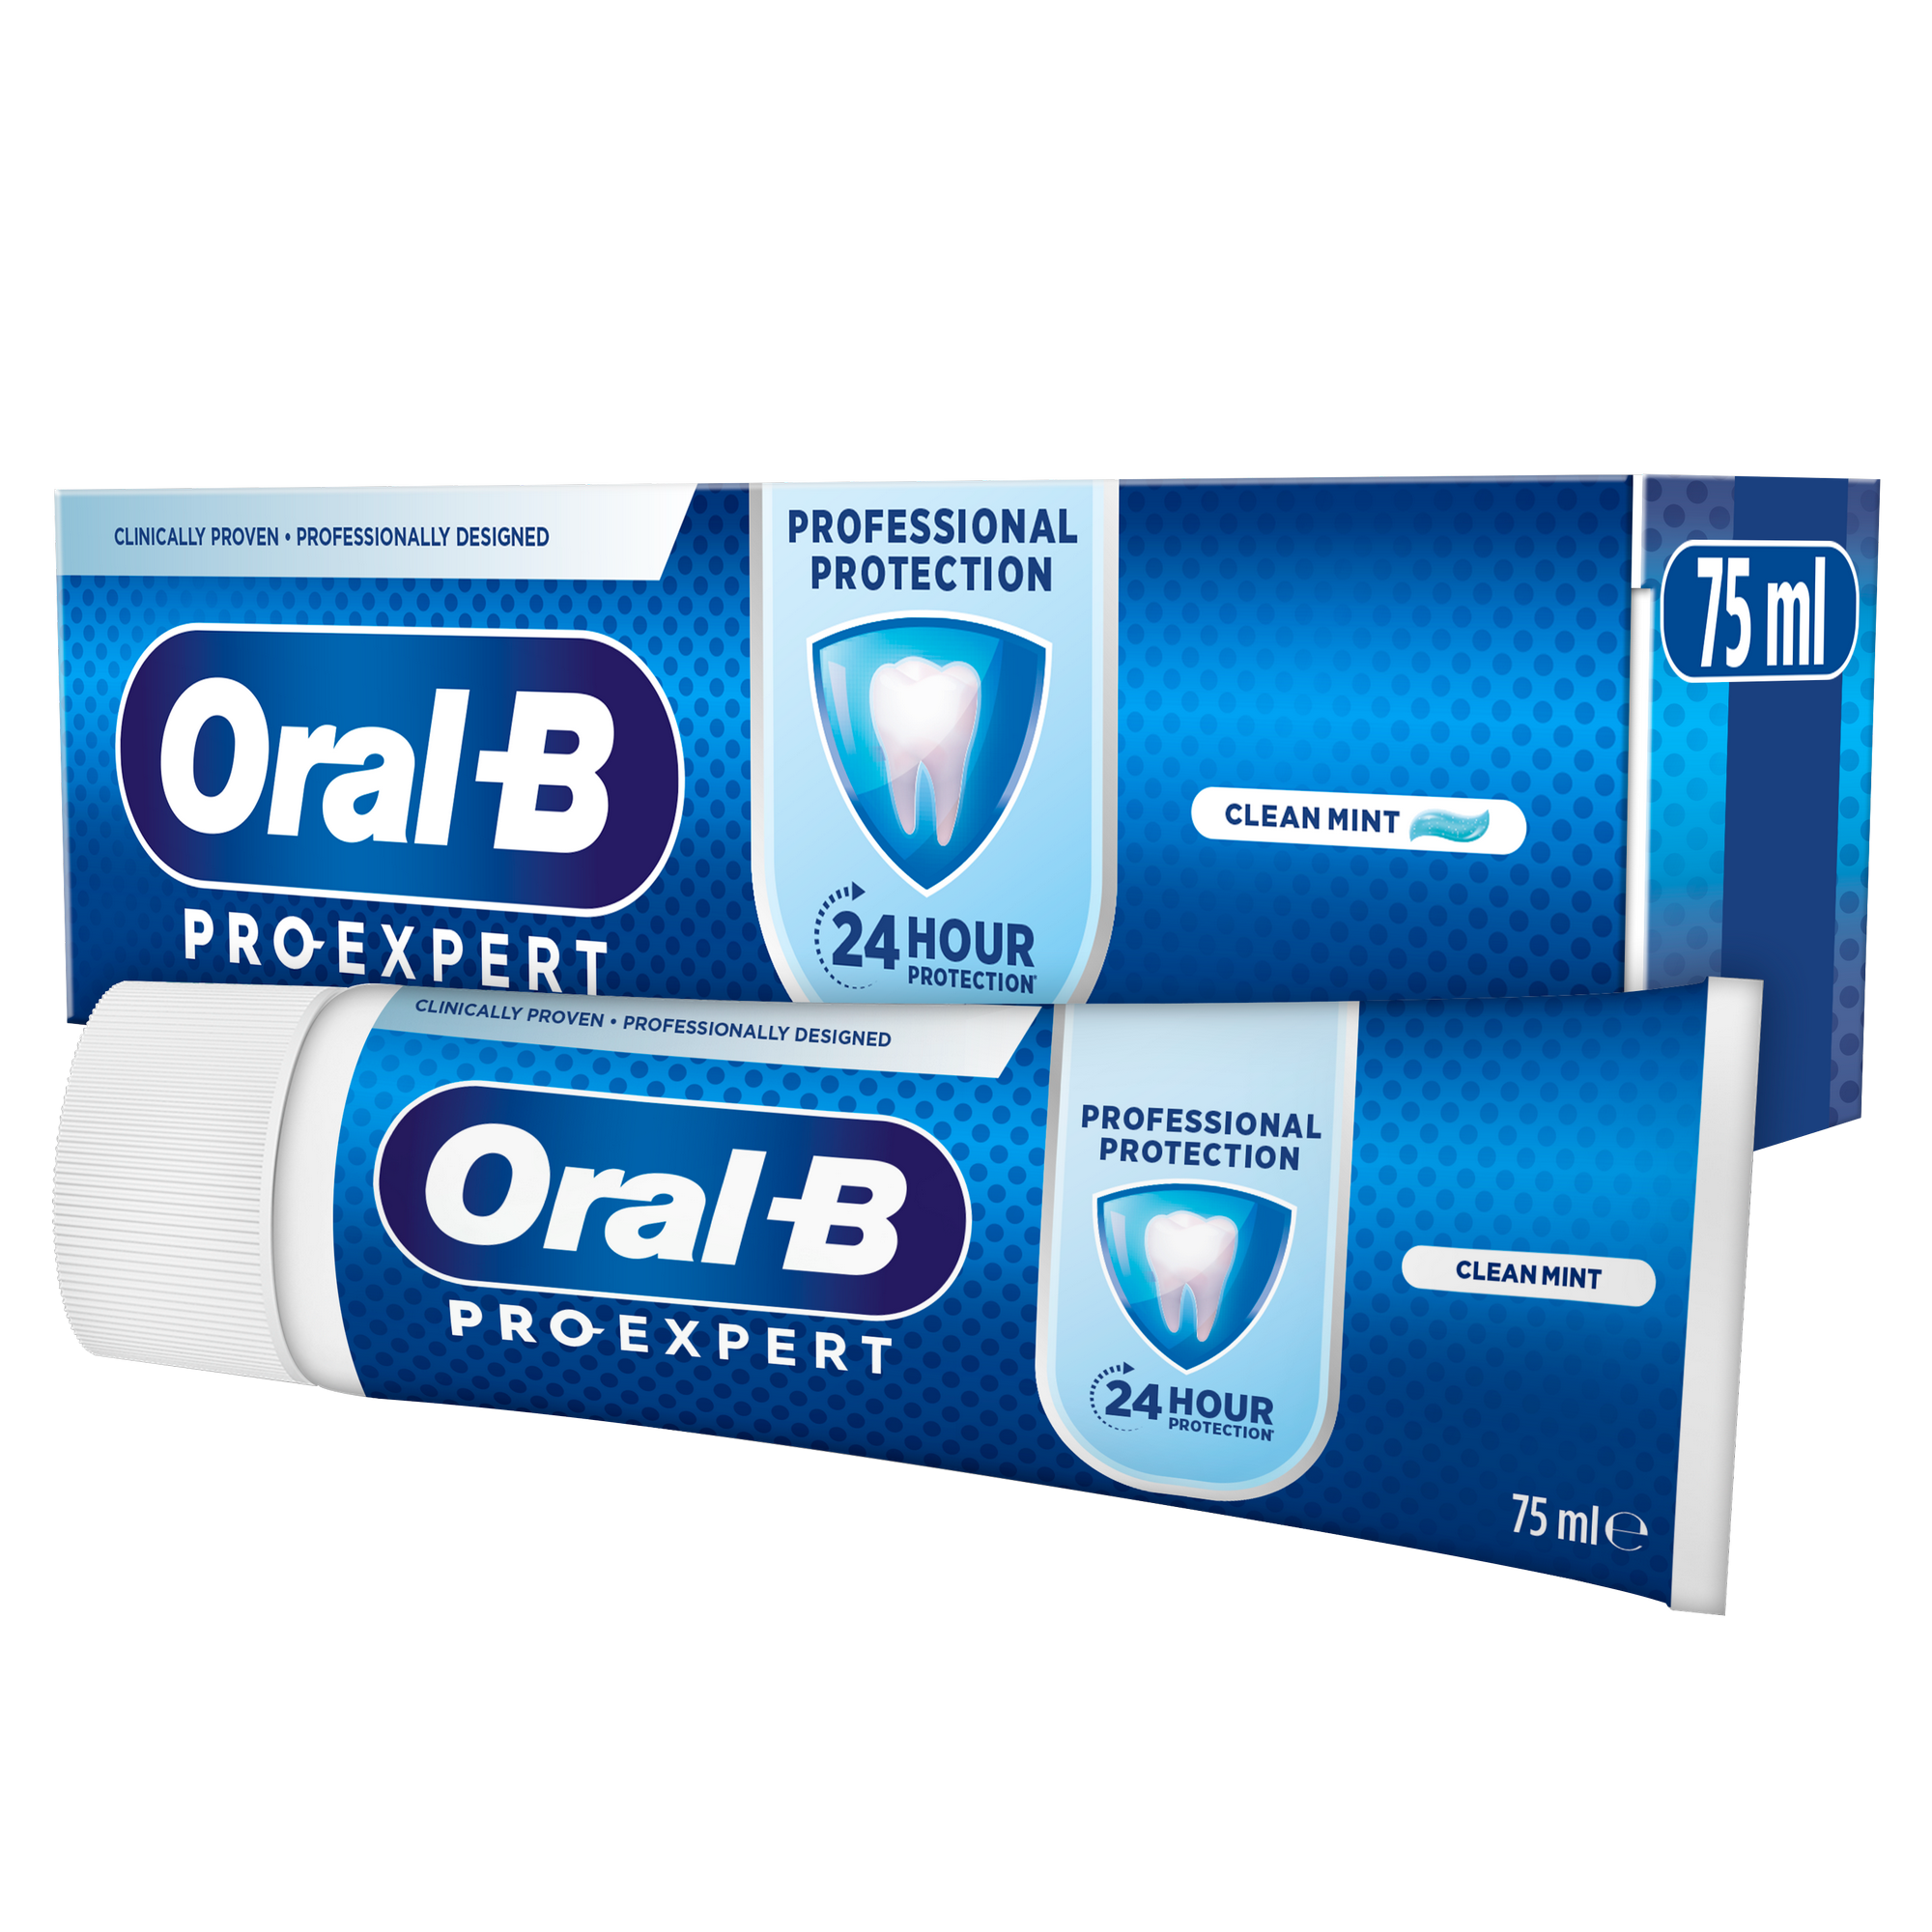 ORAL B PRO EXPERT PROFESSIONAL PROTECTION TOOTHPASTE 75ML